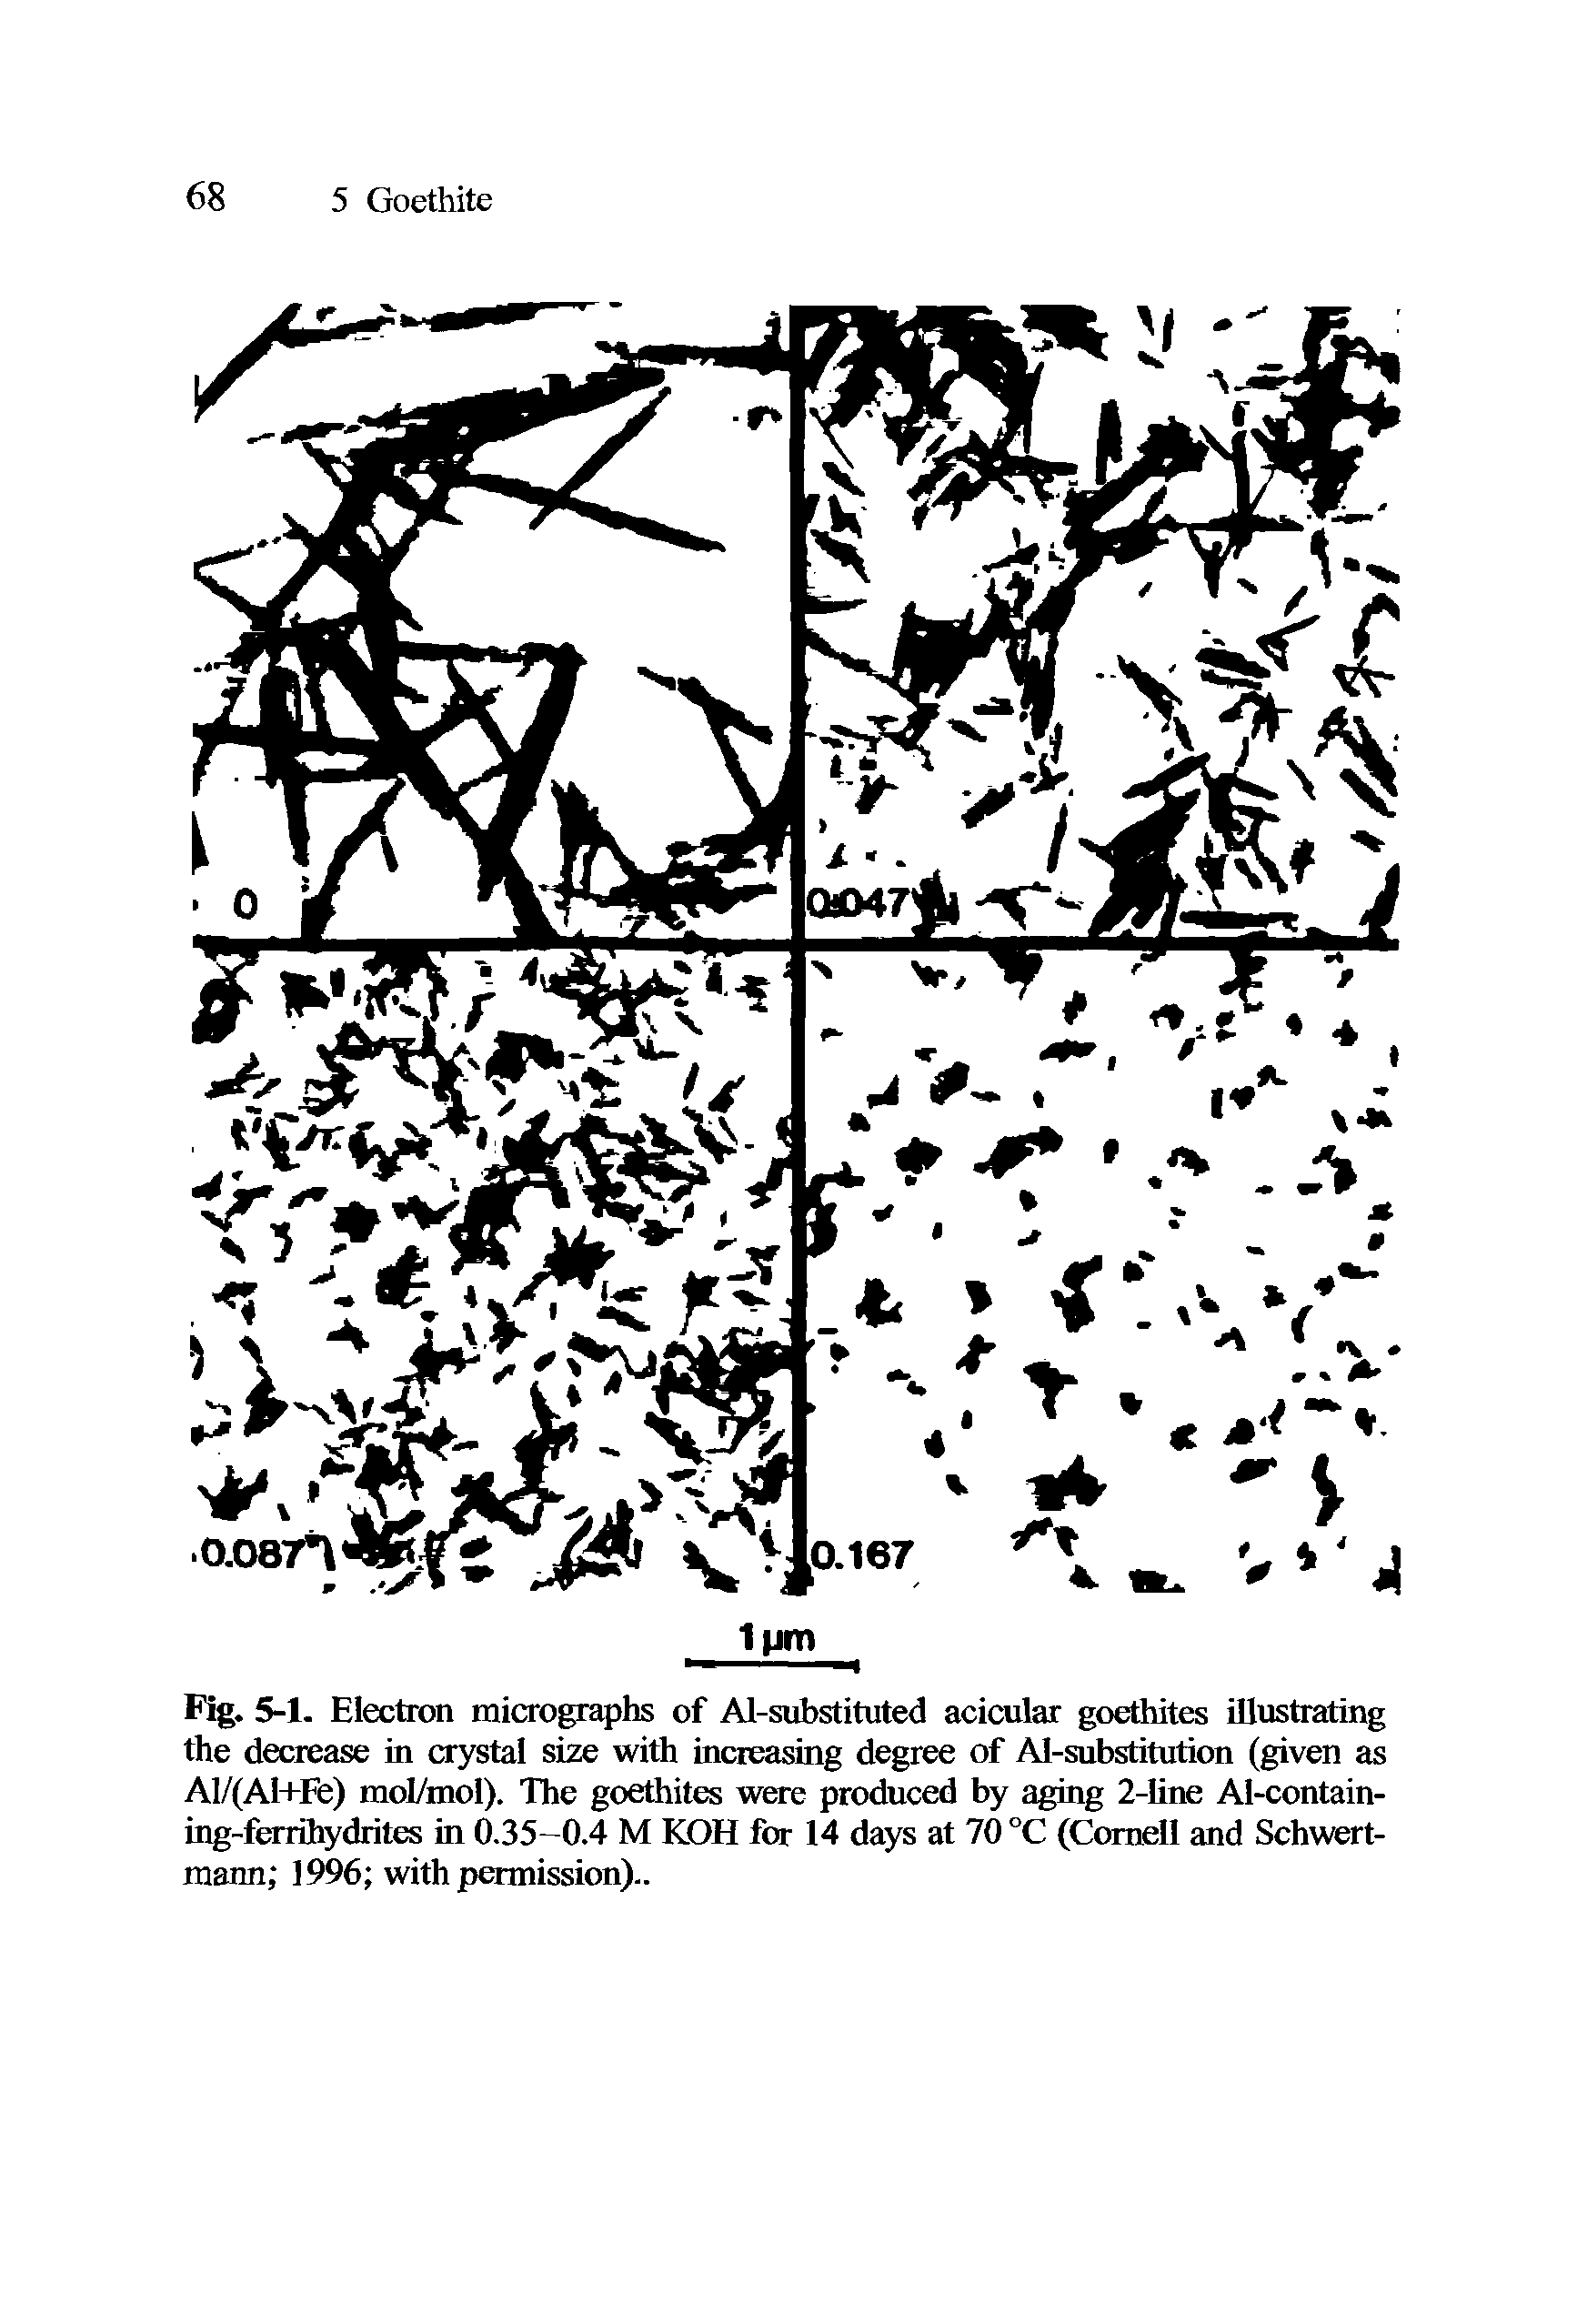 Fig. 5-1. Electron micrographs of Al-substituted acicular goethites illustrating the decrease in crystal size with increasing degree of Al-substitution (given as Al/(AI+Fe) moEmoI). The goethites were produced by aging 2-Iine Al-contain-ing-ferrihydrites in 0.35-0.4 M KOH for 14 days at 70 °C (Cornell and Schwert-marm 1996 with permission)..